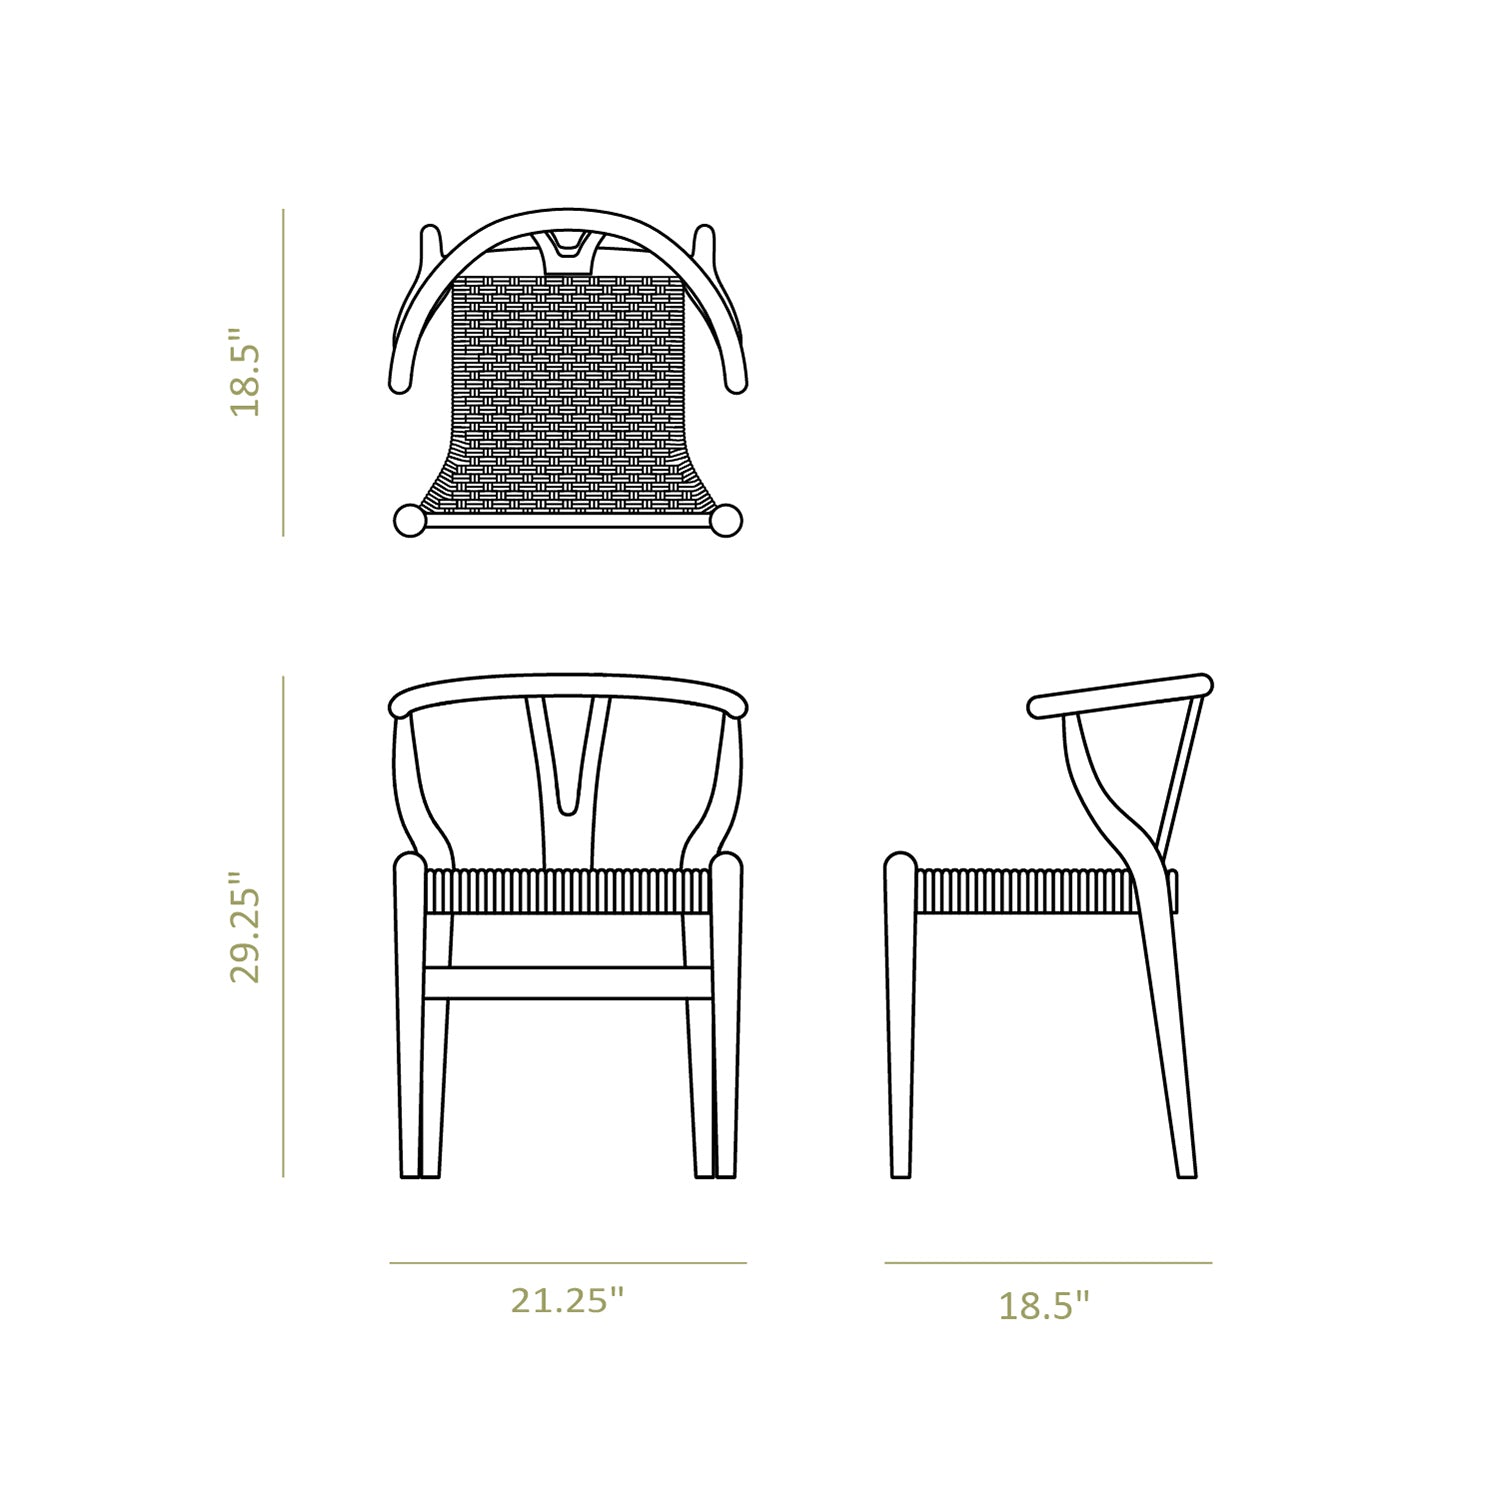 Neuwood Living 7pc Ming Dining Set Dining Chair Dimensions 